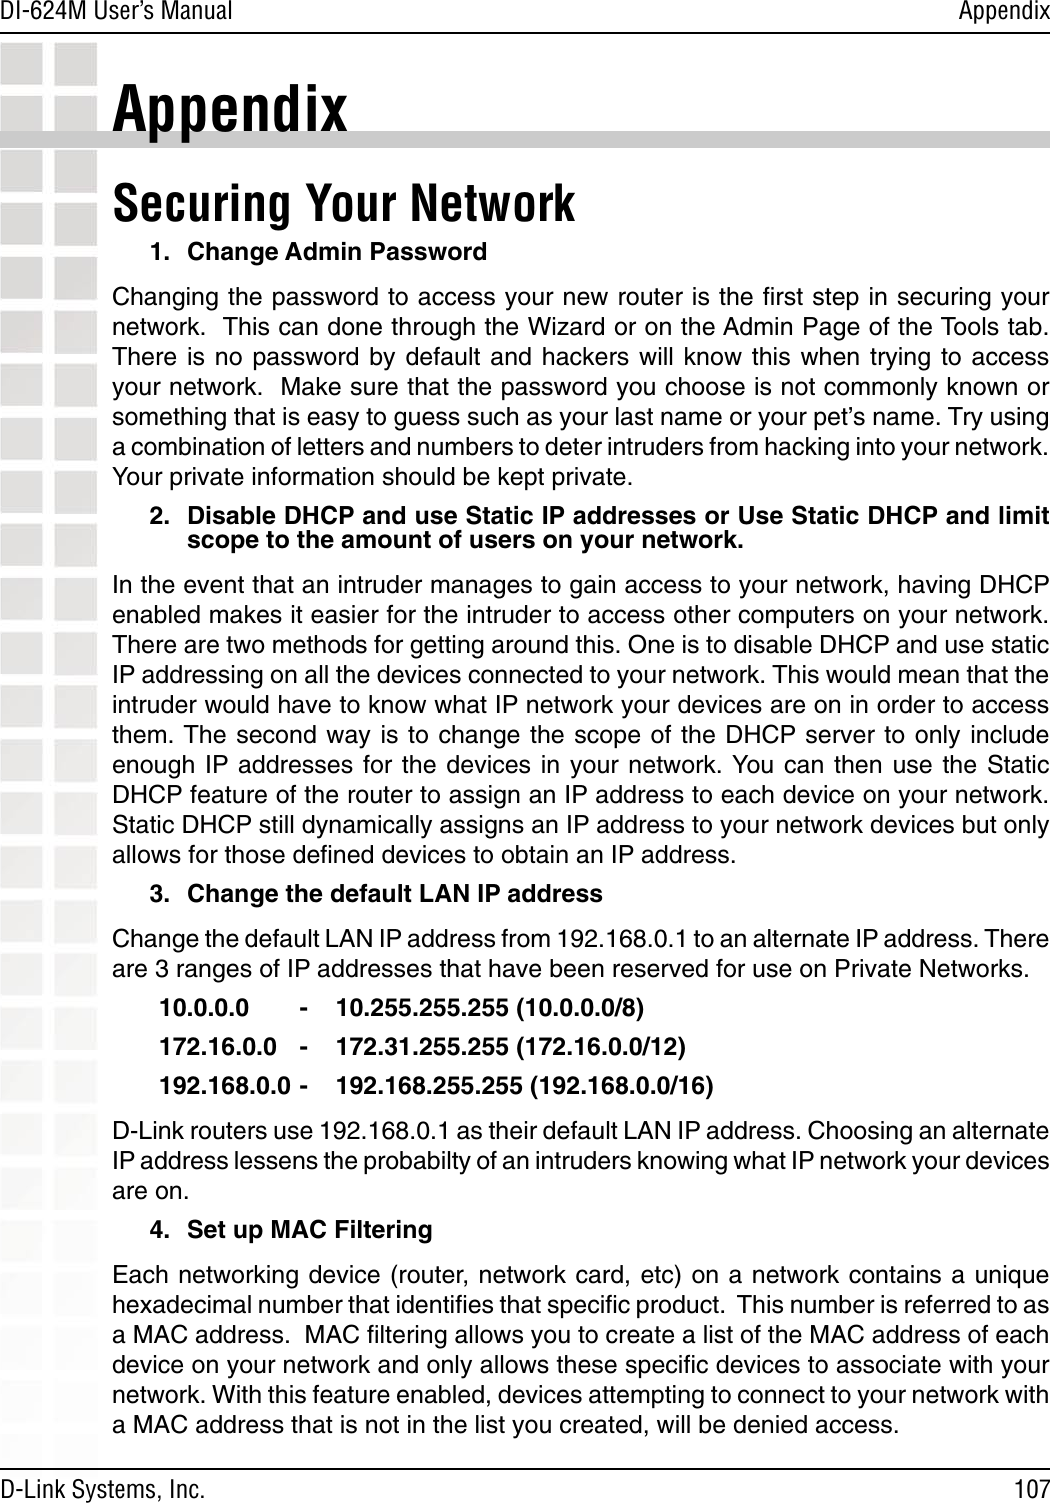 107DI-624M User’s Manual D-Link Systems, Inc.AppendixAppendixSecuring Your Network 1.  Change Admin PasswordChanging the password to access your new router is the ﬁrst step in securing your network.  This can done through the Wizard or on the Admin Page of the Tools tab.  There is  no password  by default  and hackers  will know  this when  trying to  access your network.  Make sure that the password you choose is not commonly known or something that is easy to guess such as your last name or your pet’s name. Try using a combination of letters and numbers to deter intruders from hacking into your network. Your private information should be kept private.2.  Disable DHCP and use Static IP addresses or Use Static DHCP and limit scope to the amount of users on your network.In the event that an intruder manages to gain access to your network, having DHCP enabled makes it easier for the intruder to access other computers on your network. There are two methods for getting around this. One is to disable DHCP and use static IP addressing on all the devices connected to your network. This would mean that the intruder would have to know what IP network your devices are on in order to access them. The  second  way  is to change the scope of the DHCP server to only include enough IP addresses for the  devices in your  network. You can then  use the  Static DHCP feature of the router to assign an IP address to each device on your network. Static DHCP still dynamically assigns an IP address to your network devices but only allows for those deﬁned devices to obtain an IP address.3.  Change the default LAN IP addressChange the default LAN IP address from 192.168.0.1 to an alternate IP address. There are 3 ranges of IP addresses that have been reserved for use on Private Networks. 10.0.0.0  -    10.255.255.255 (10.0.0.0/8) 172.16.0.0  -    172.31.255.255 (172.16.0.0/12) 192.168.0.0 -    192.168.255.255 (192.168.0.0/16)D-Link routers use 192.168.0.1 as their default LAN IP address. Choosing an alternate IP address lessens the probabilty of an intruders knowing what IP network your devices are on. 4.  Set up MAC FilteringEach networking device (router, network card, etc) on a network contains a unique hexadecimal number that identiﬁes that speciﬁc product.  This number is referred to as a MAC address.  MAC ﬁltering allows you to create a list of the MAC address of each device on your network and only allows these speciﬁc devices to associate with your network. With this feature enabled, devices attempting to connect to your network with a MAC address that is not in the list you created, will be denied access.